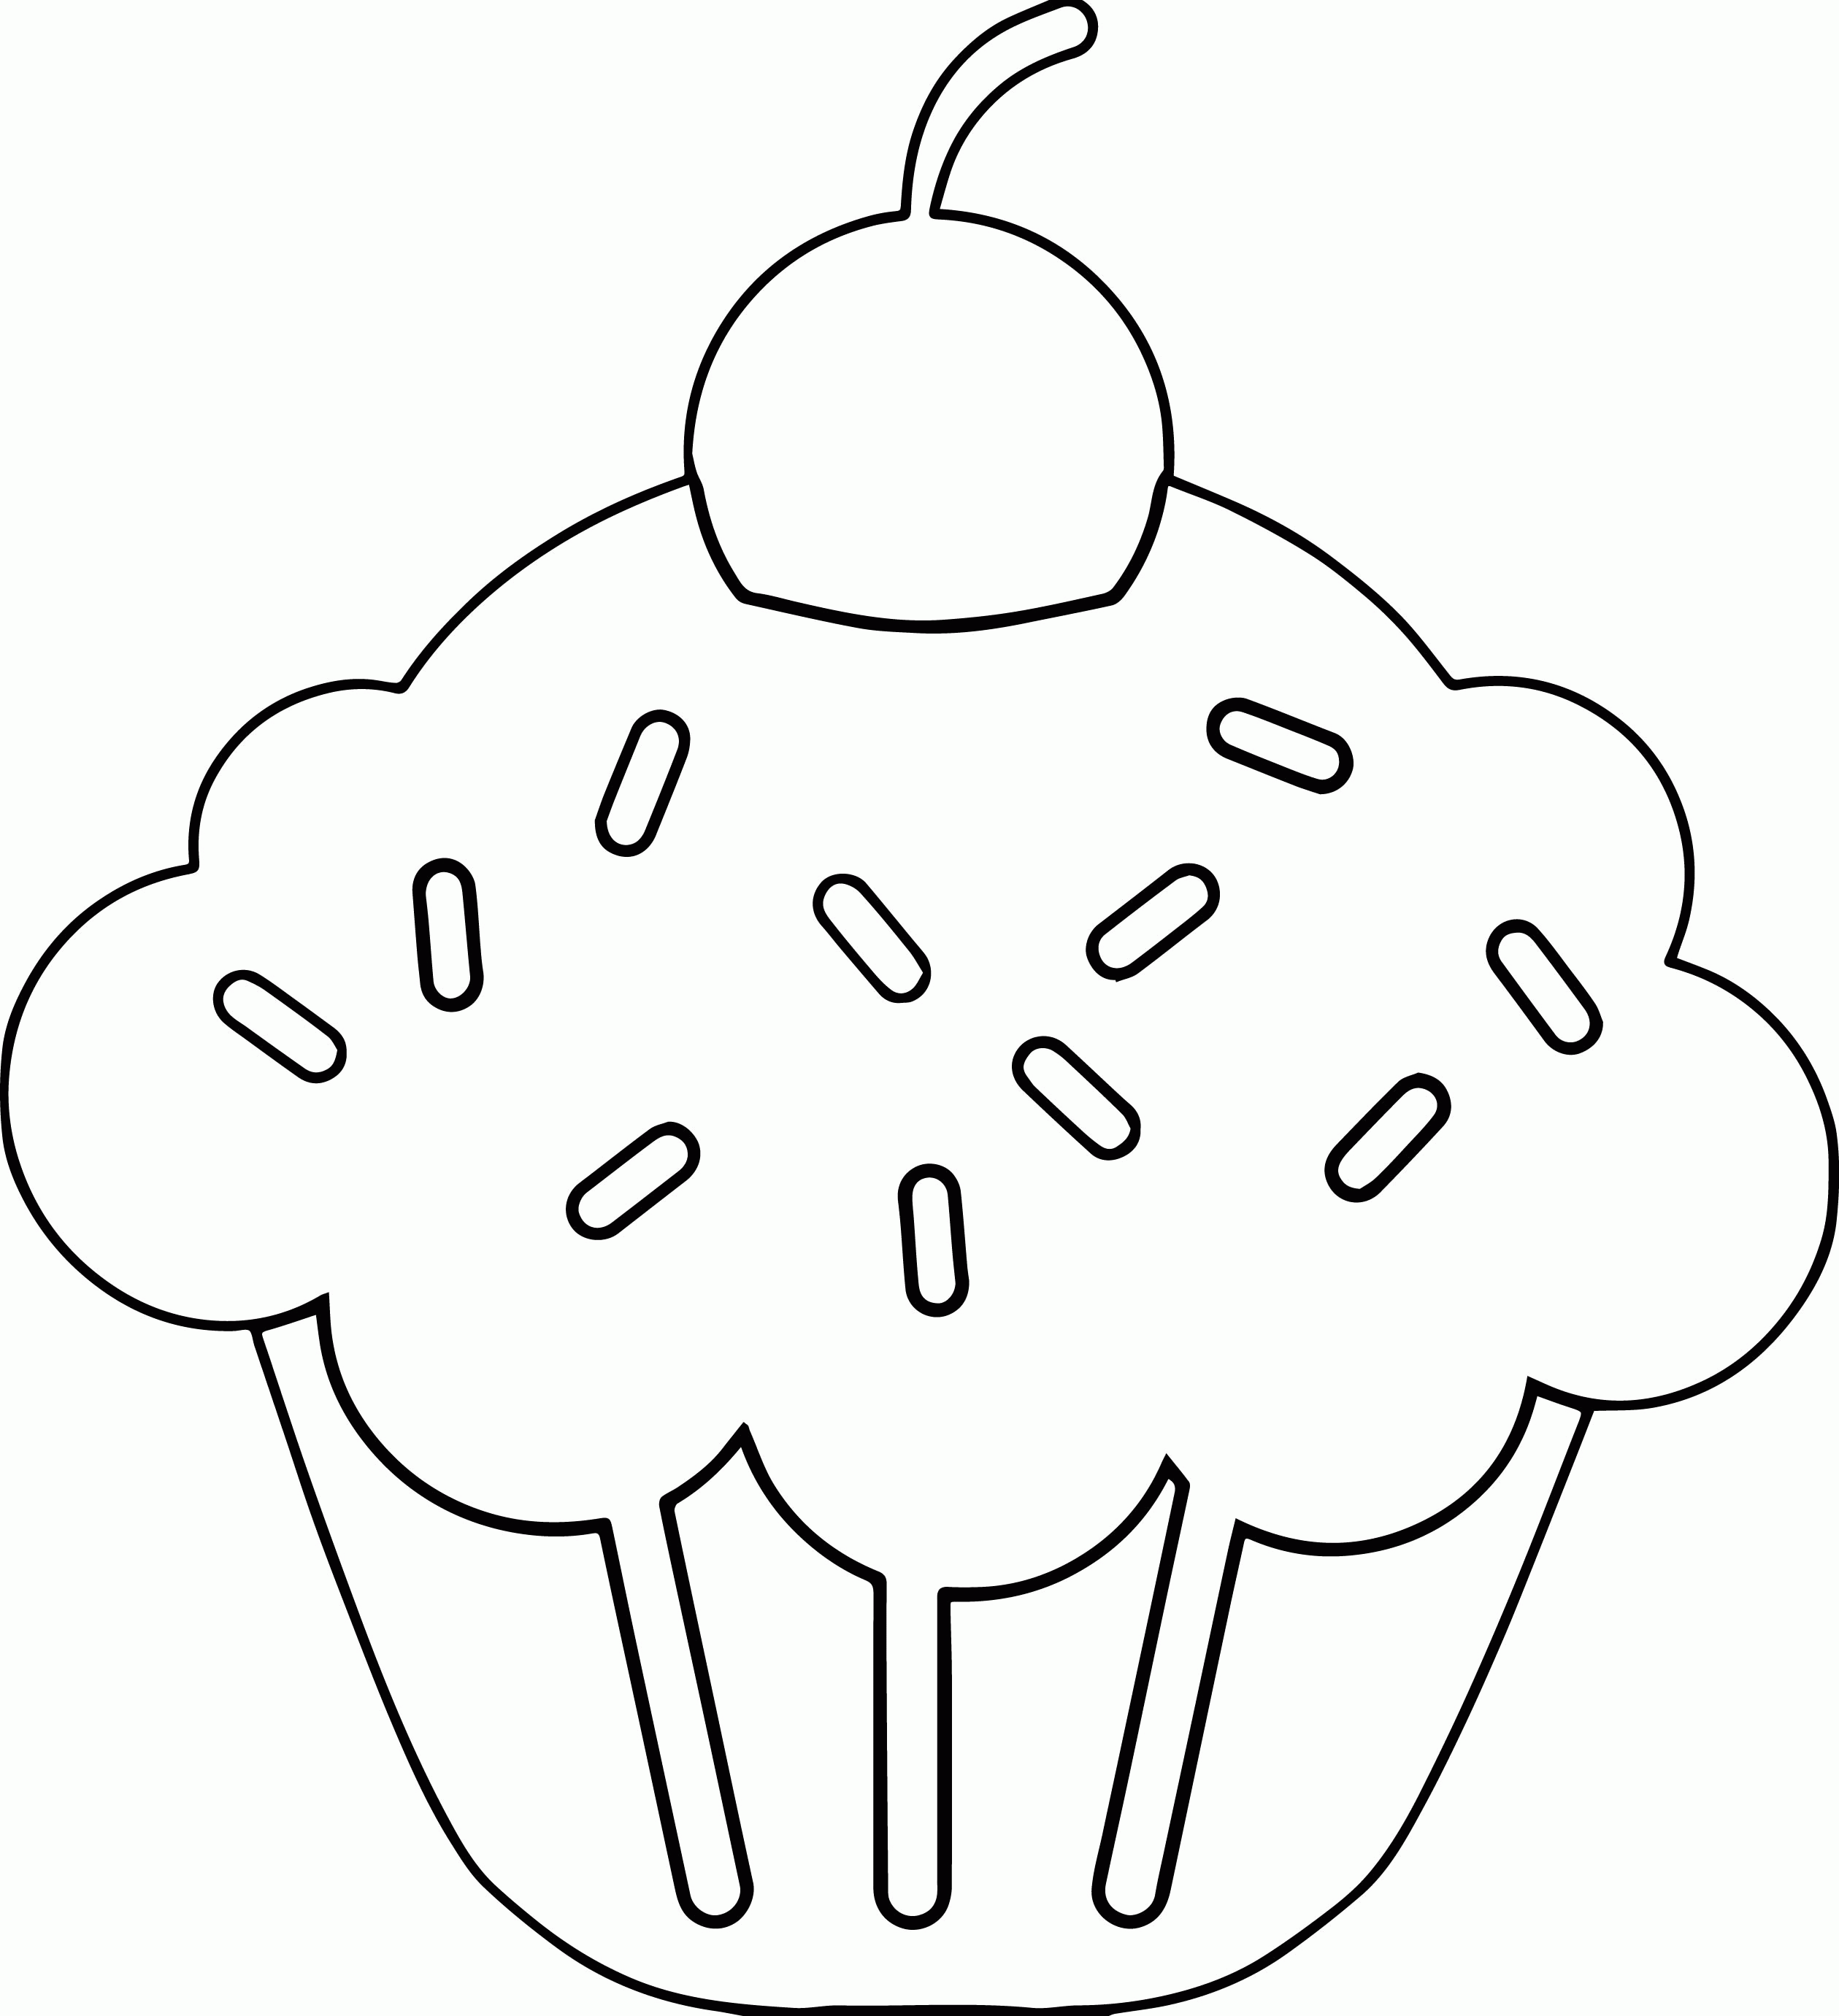 Cup Cake 32 Cool Coloring Page